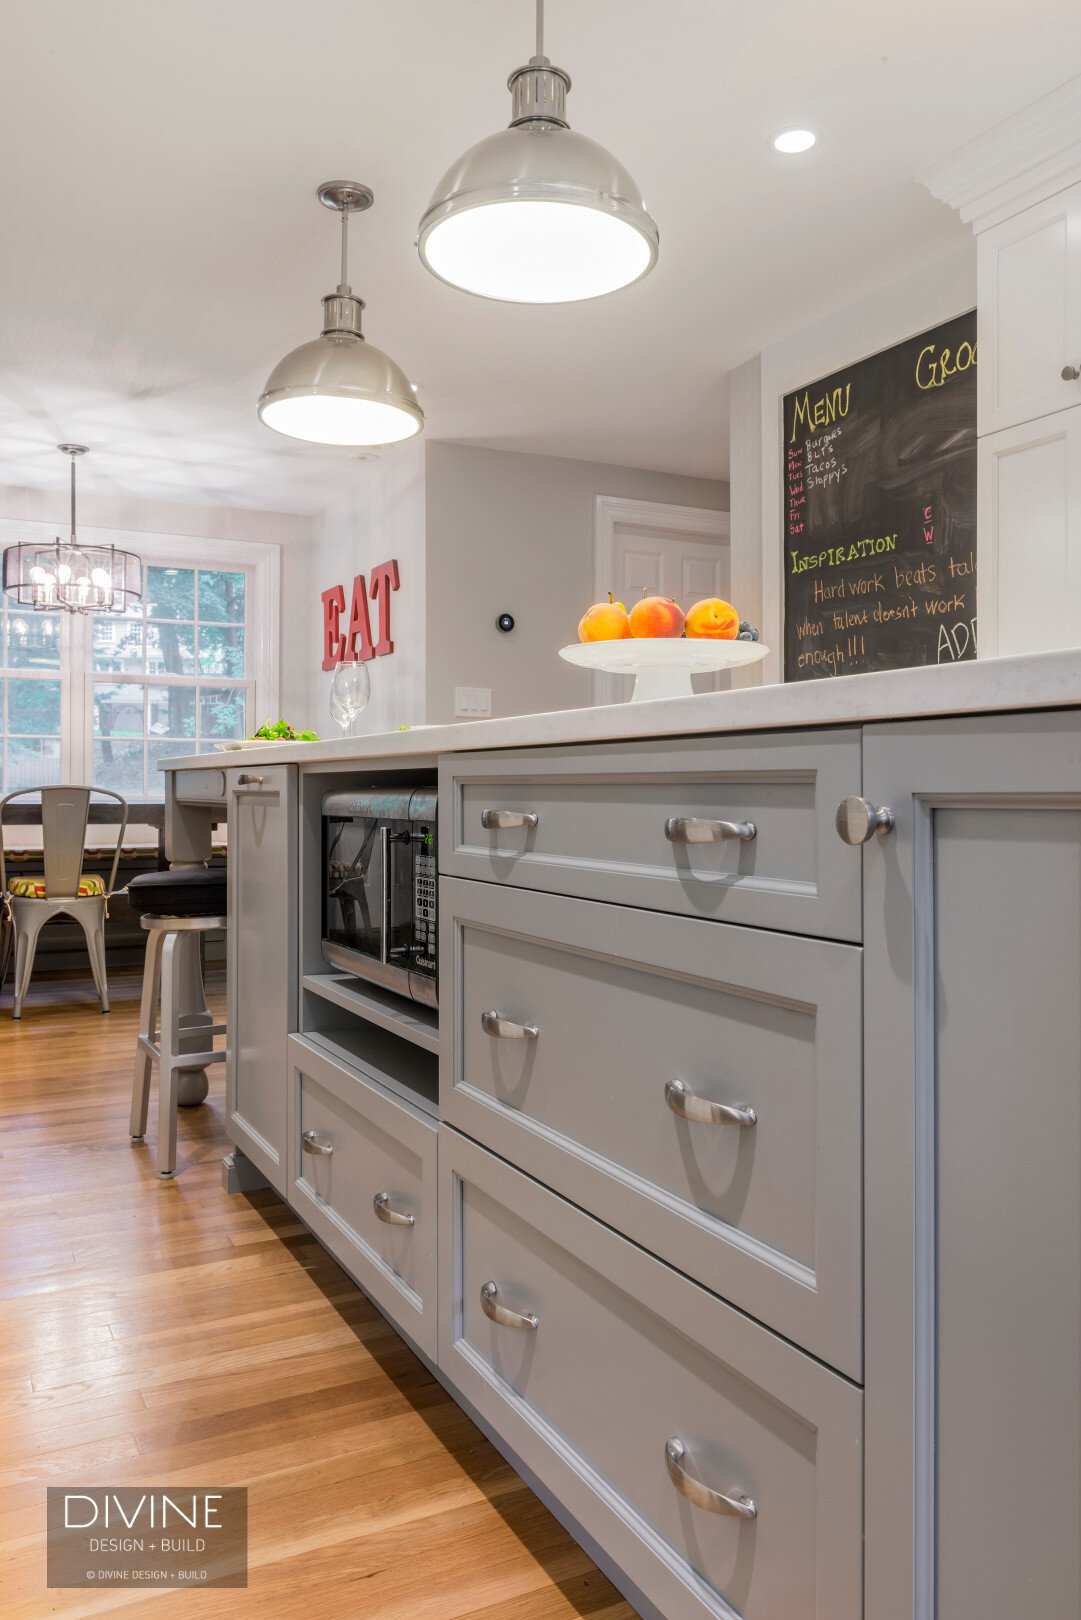 Grey and white transitional style kitchen with shaker cabinets and integrated dog feeding station. Chalkboard. Subway tile backsplash and industrial style lights and shelving